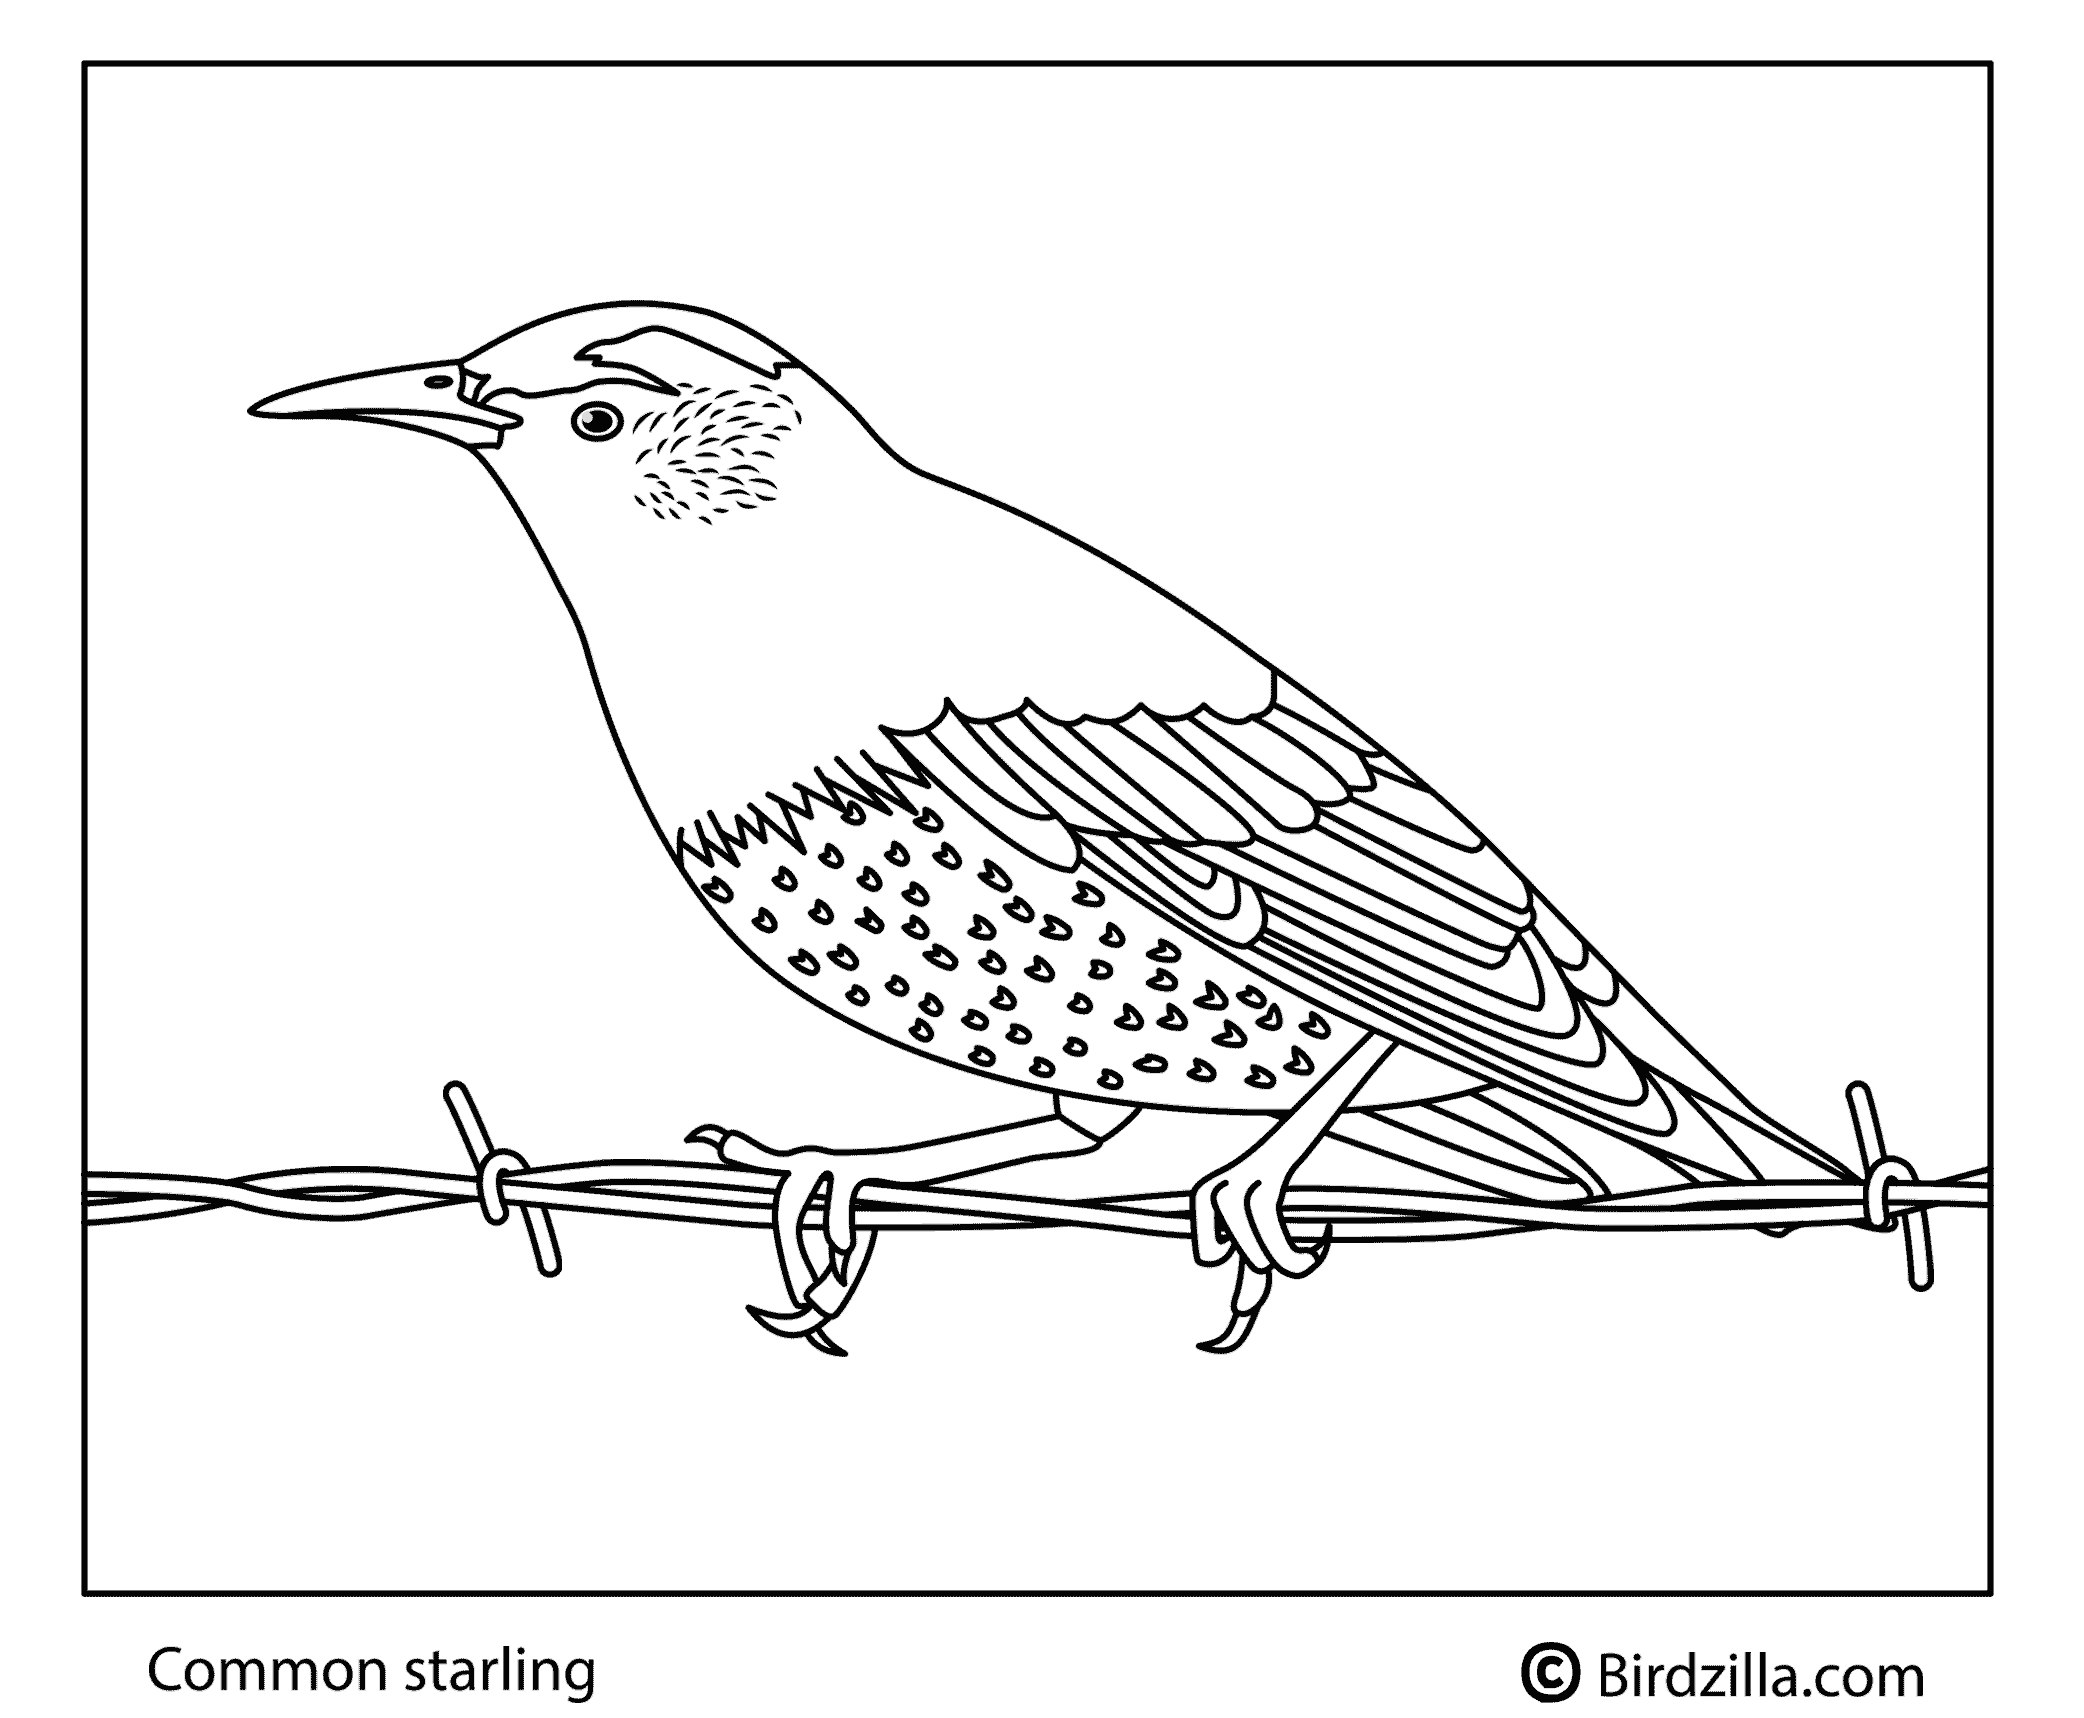 Common starling coloring page